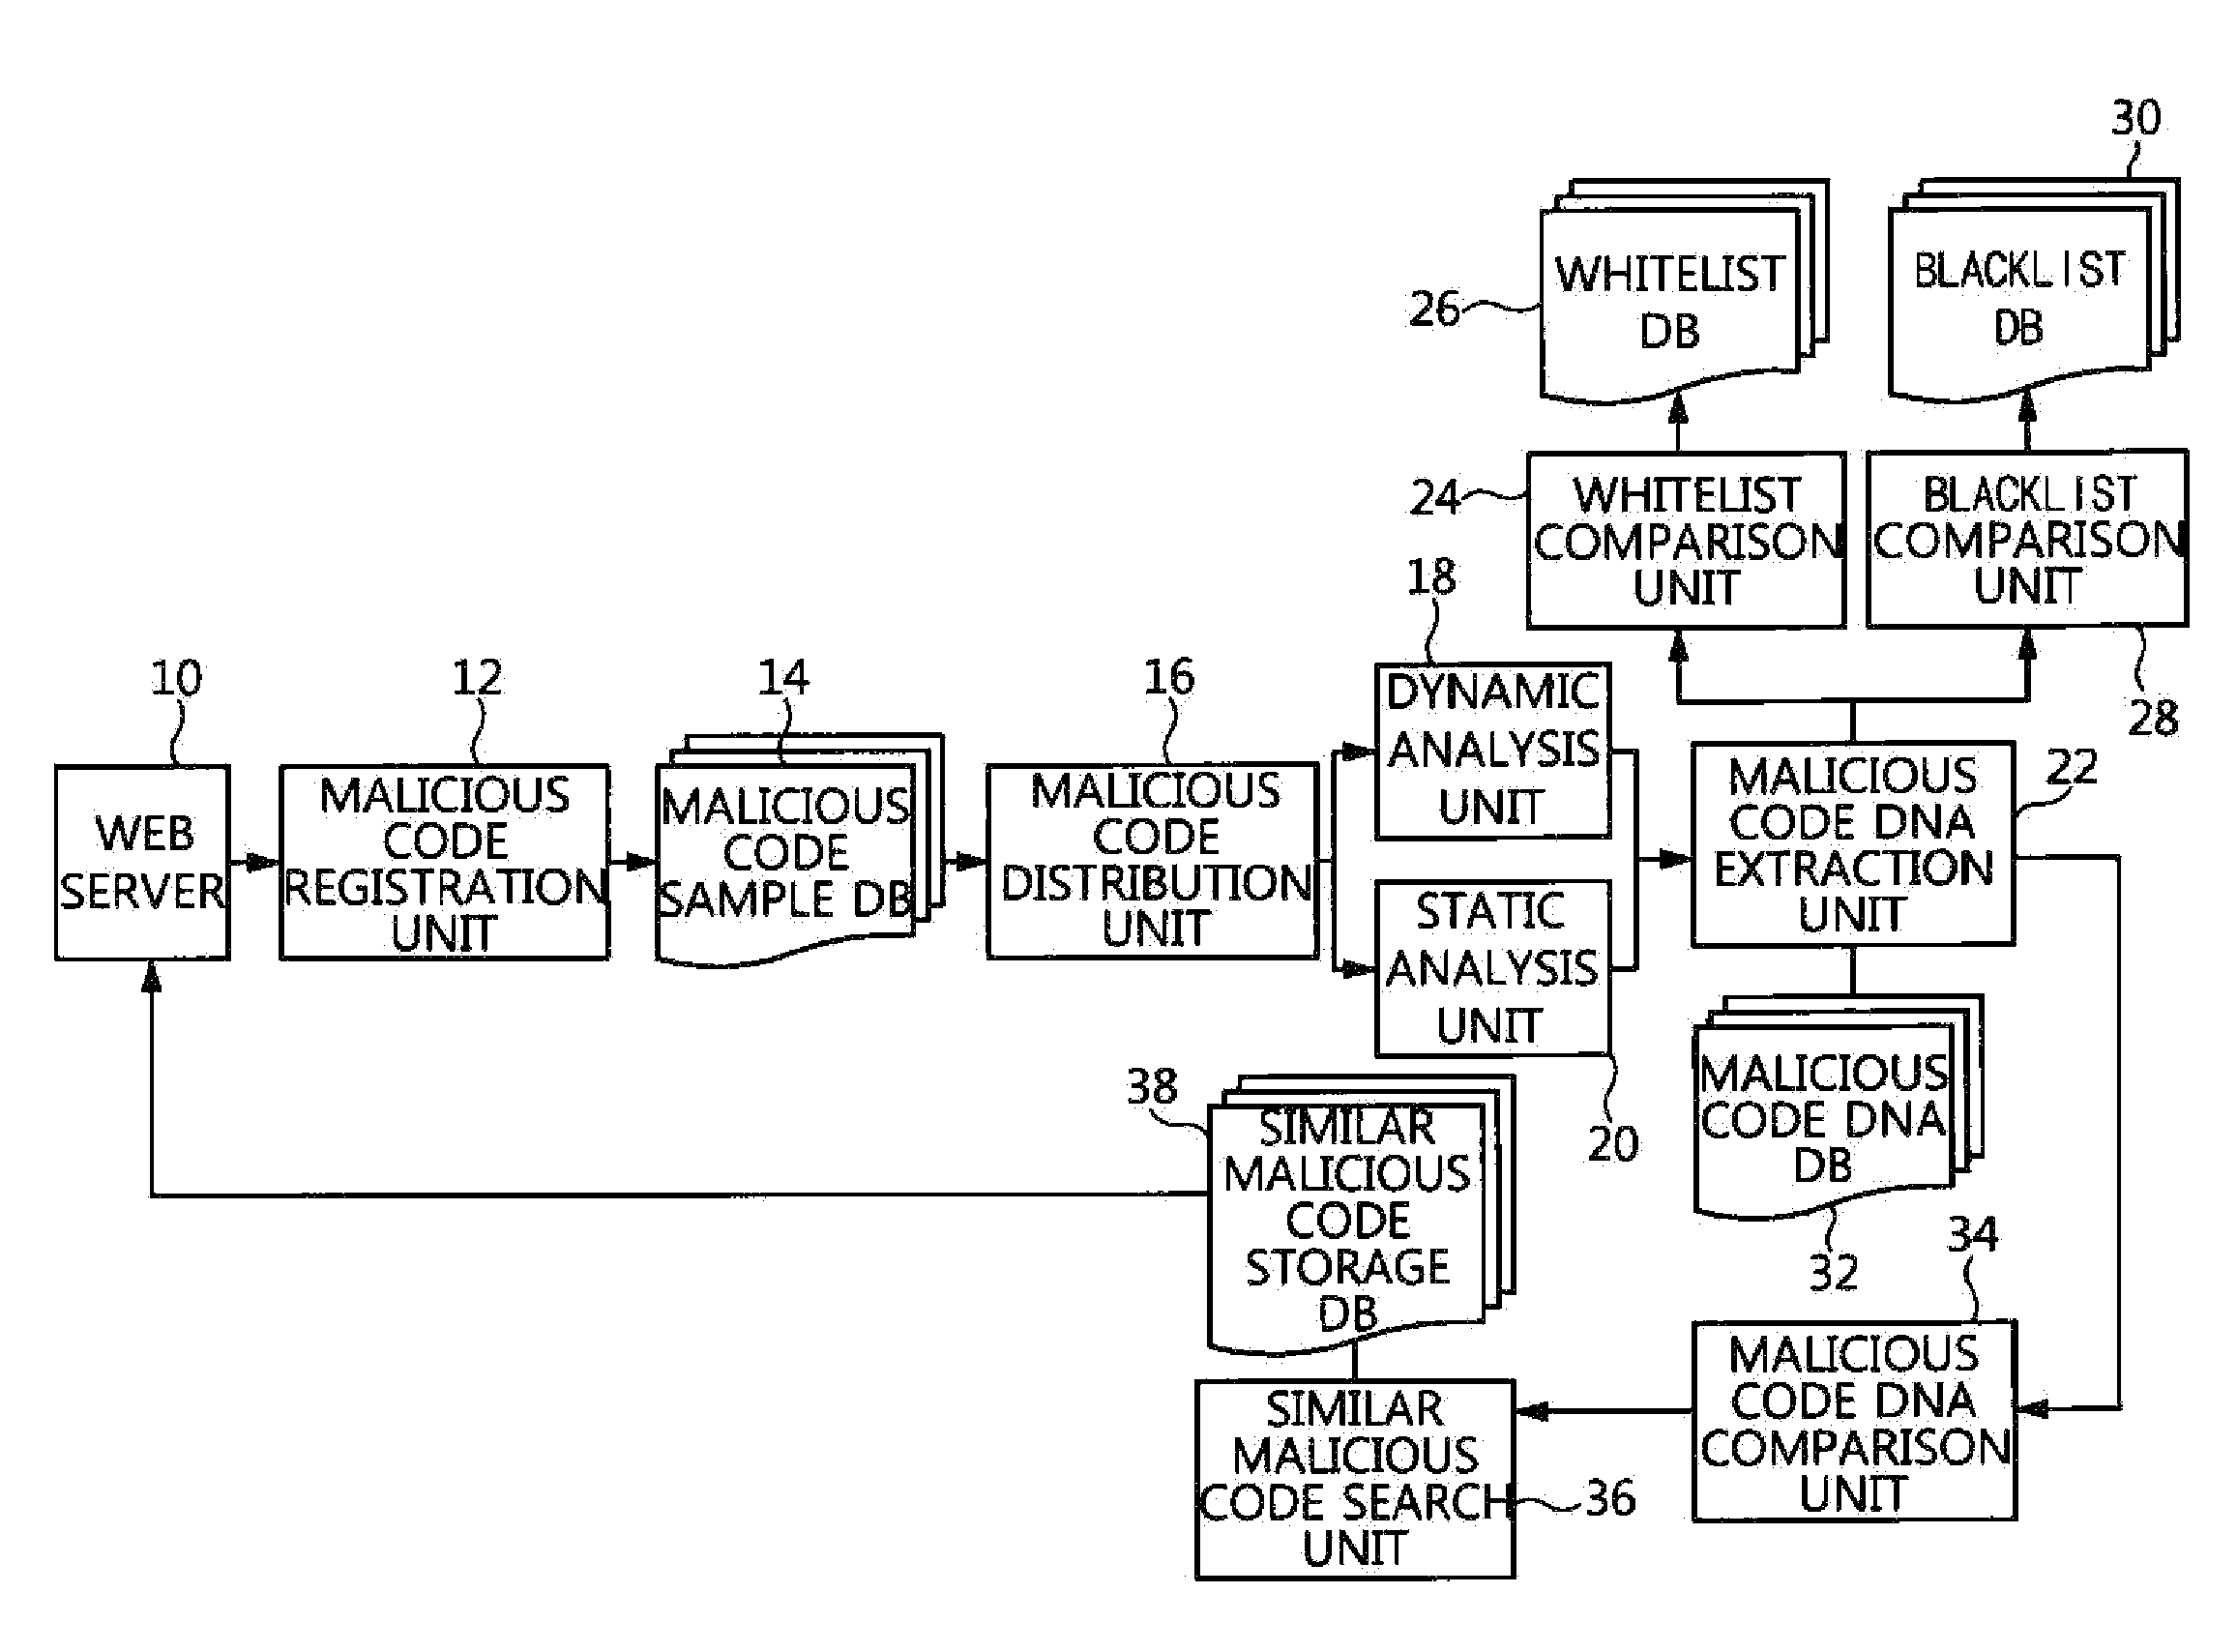 Apparatus and method for searching for similar malicious code based on malicious code feature information